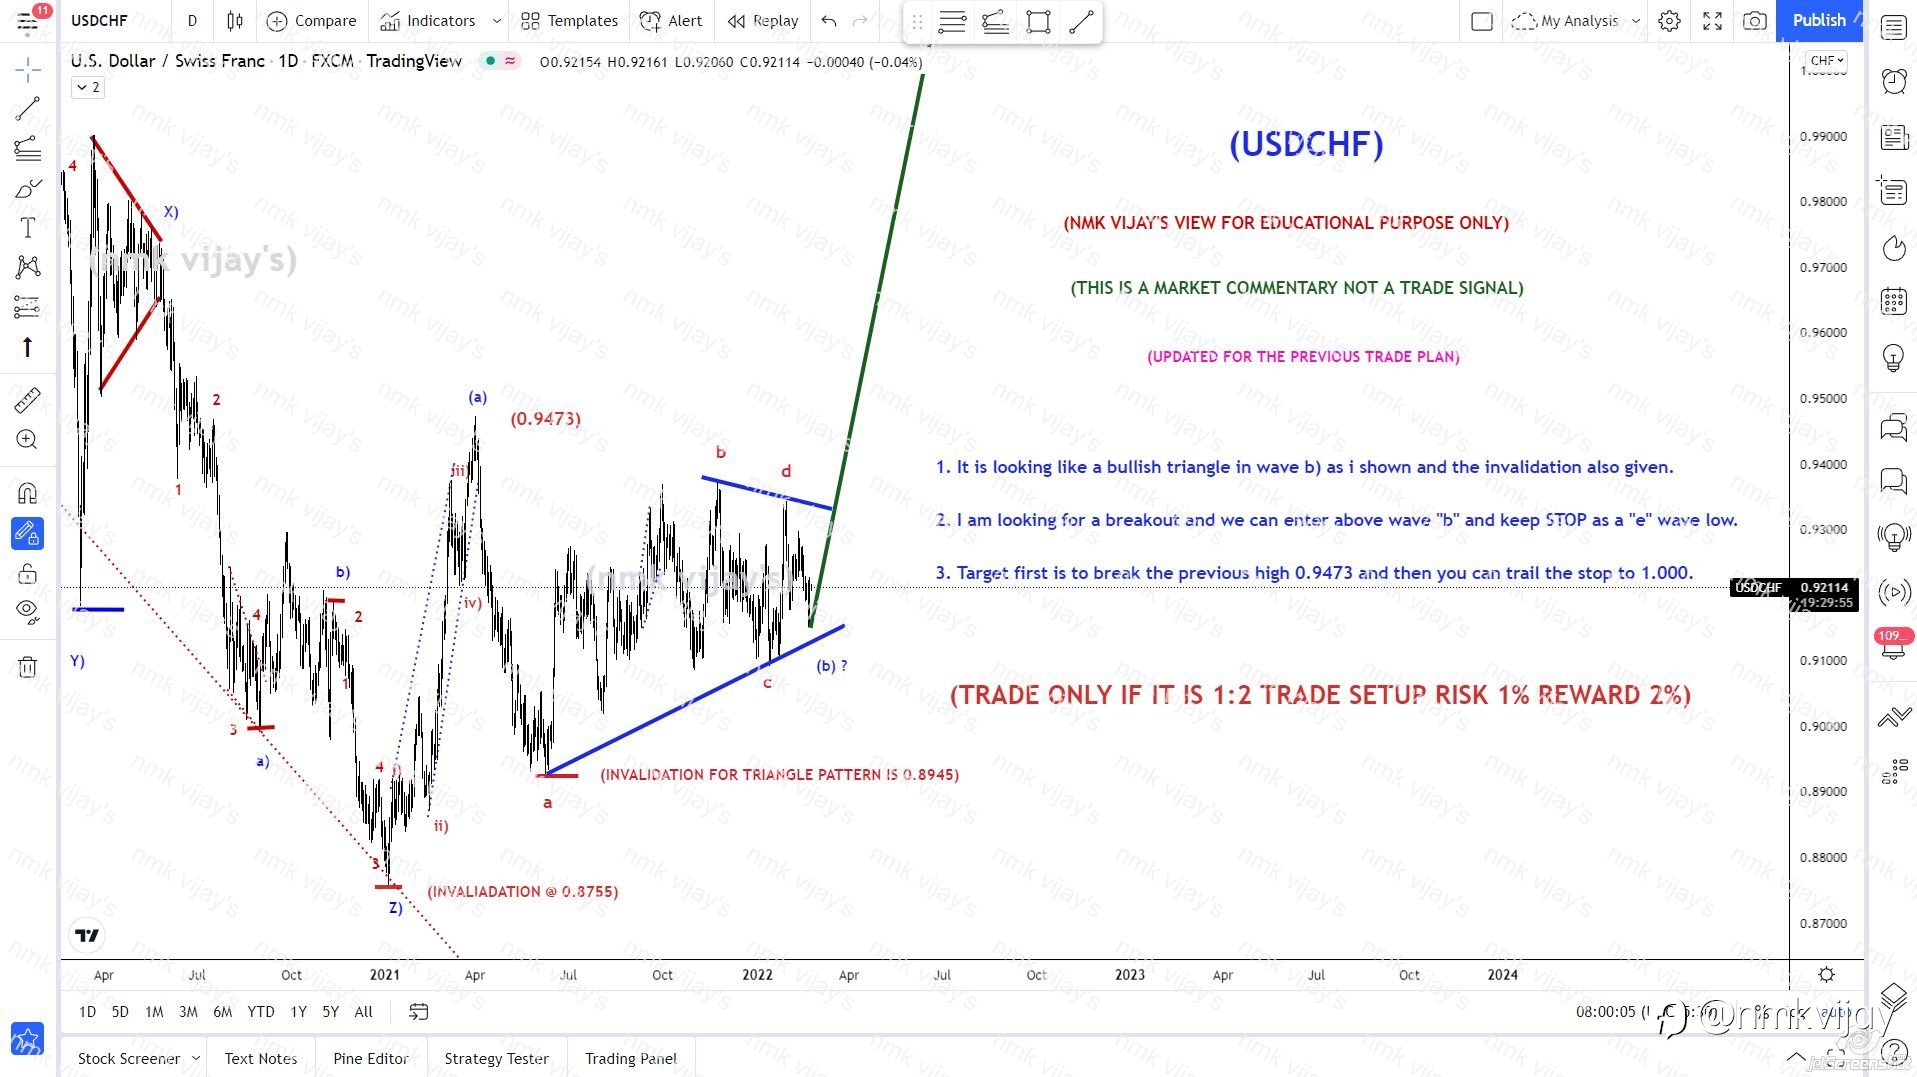 USDCHF-Will make a bullish triangle in wave b) and may valid ?